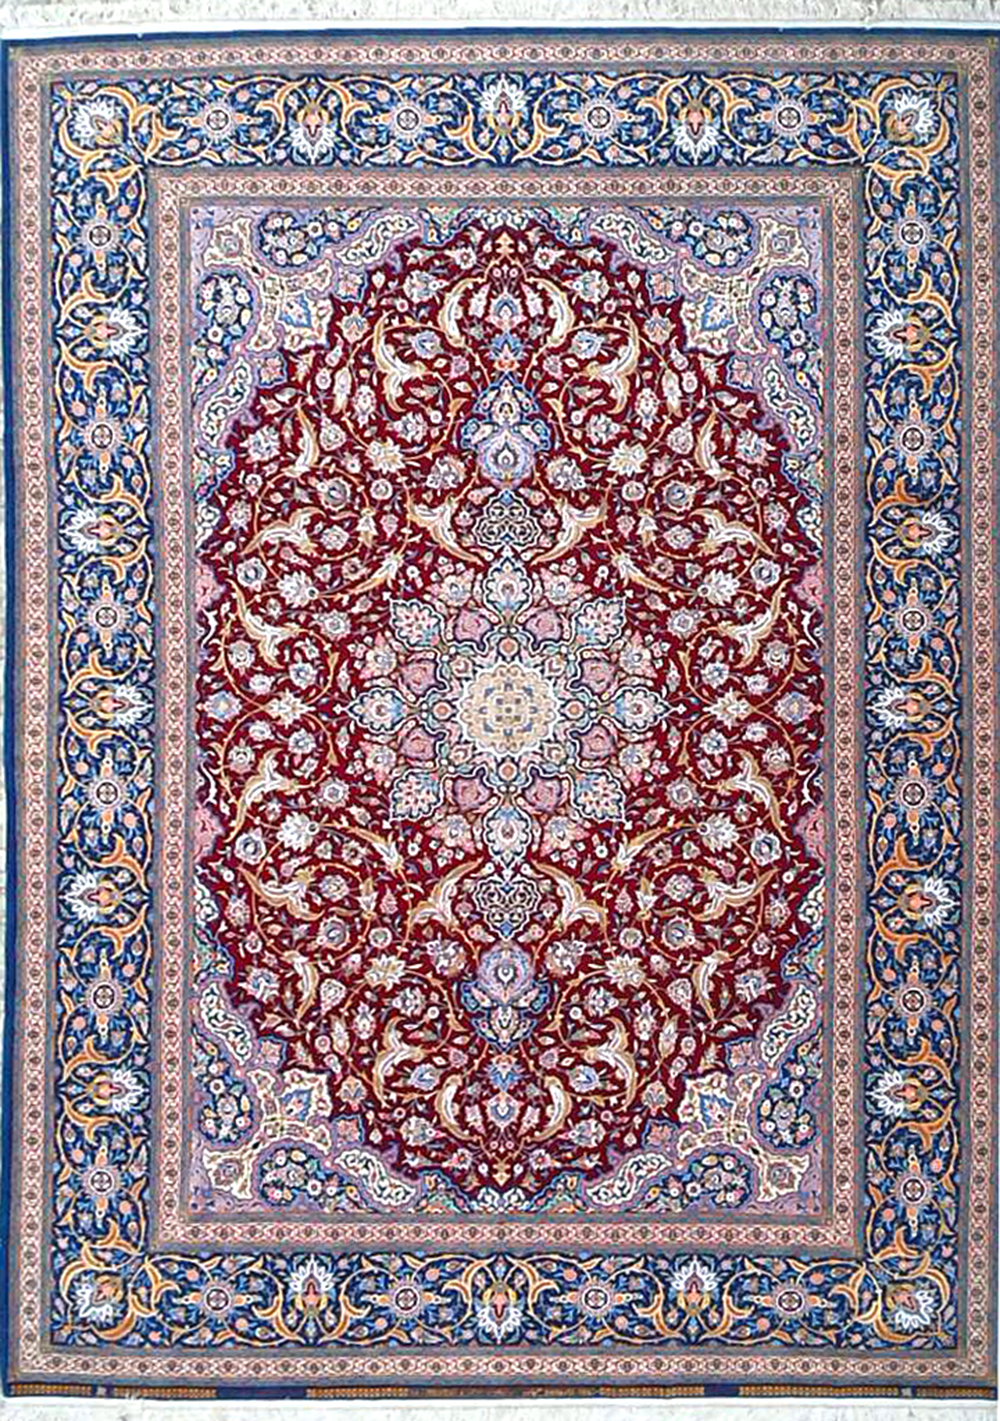 Isfahan by Feyzollah Haghighi master piece 10x13 with vegetable dye color silk foundation persian rug (3)